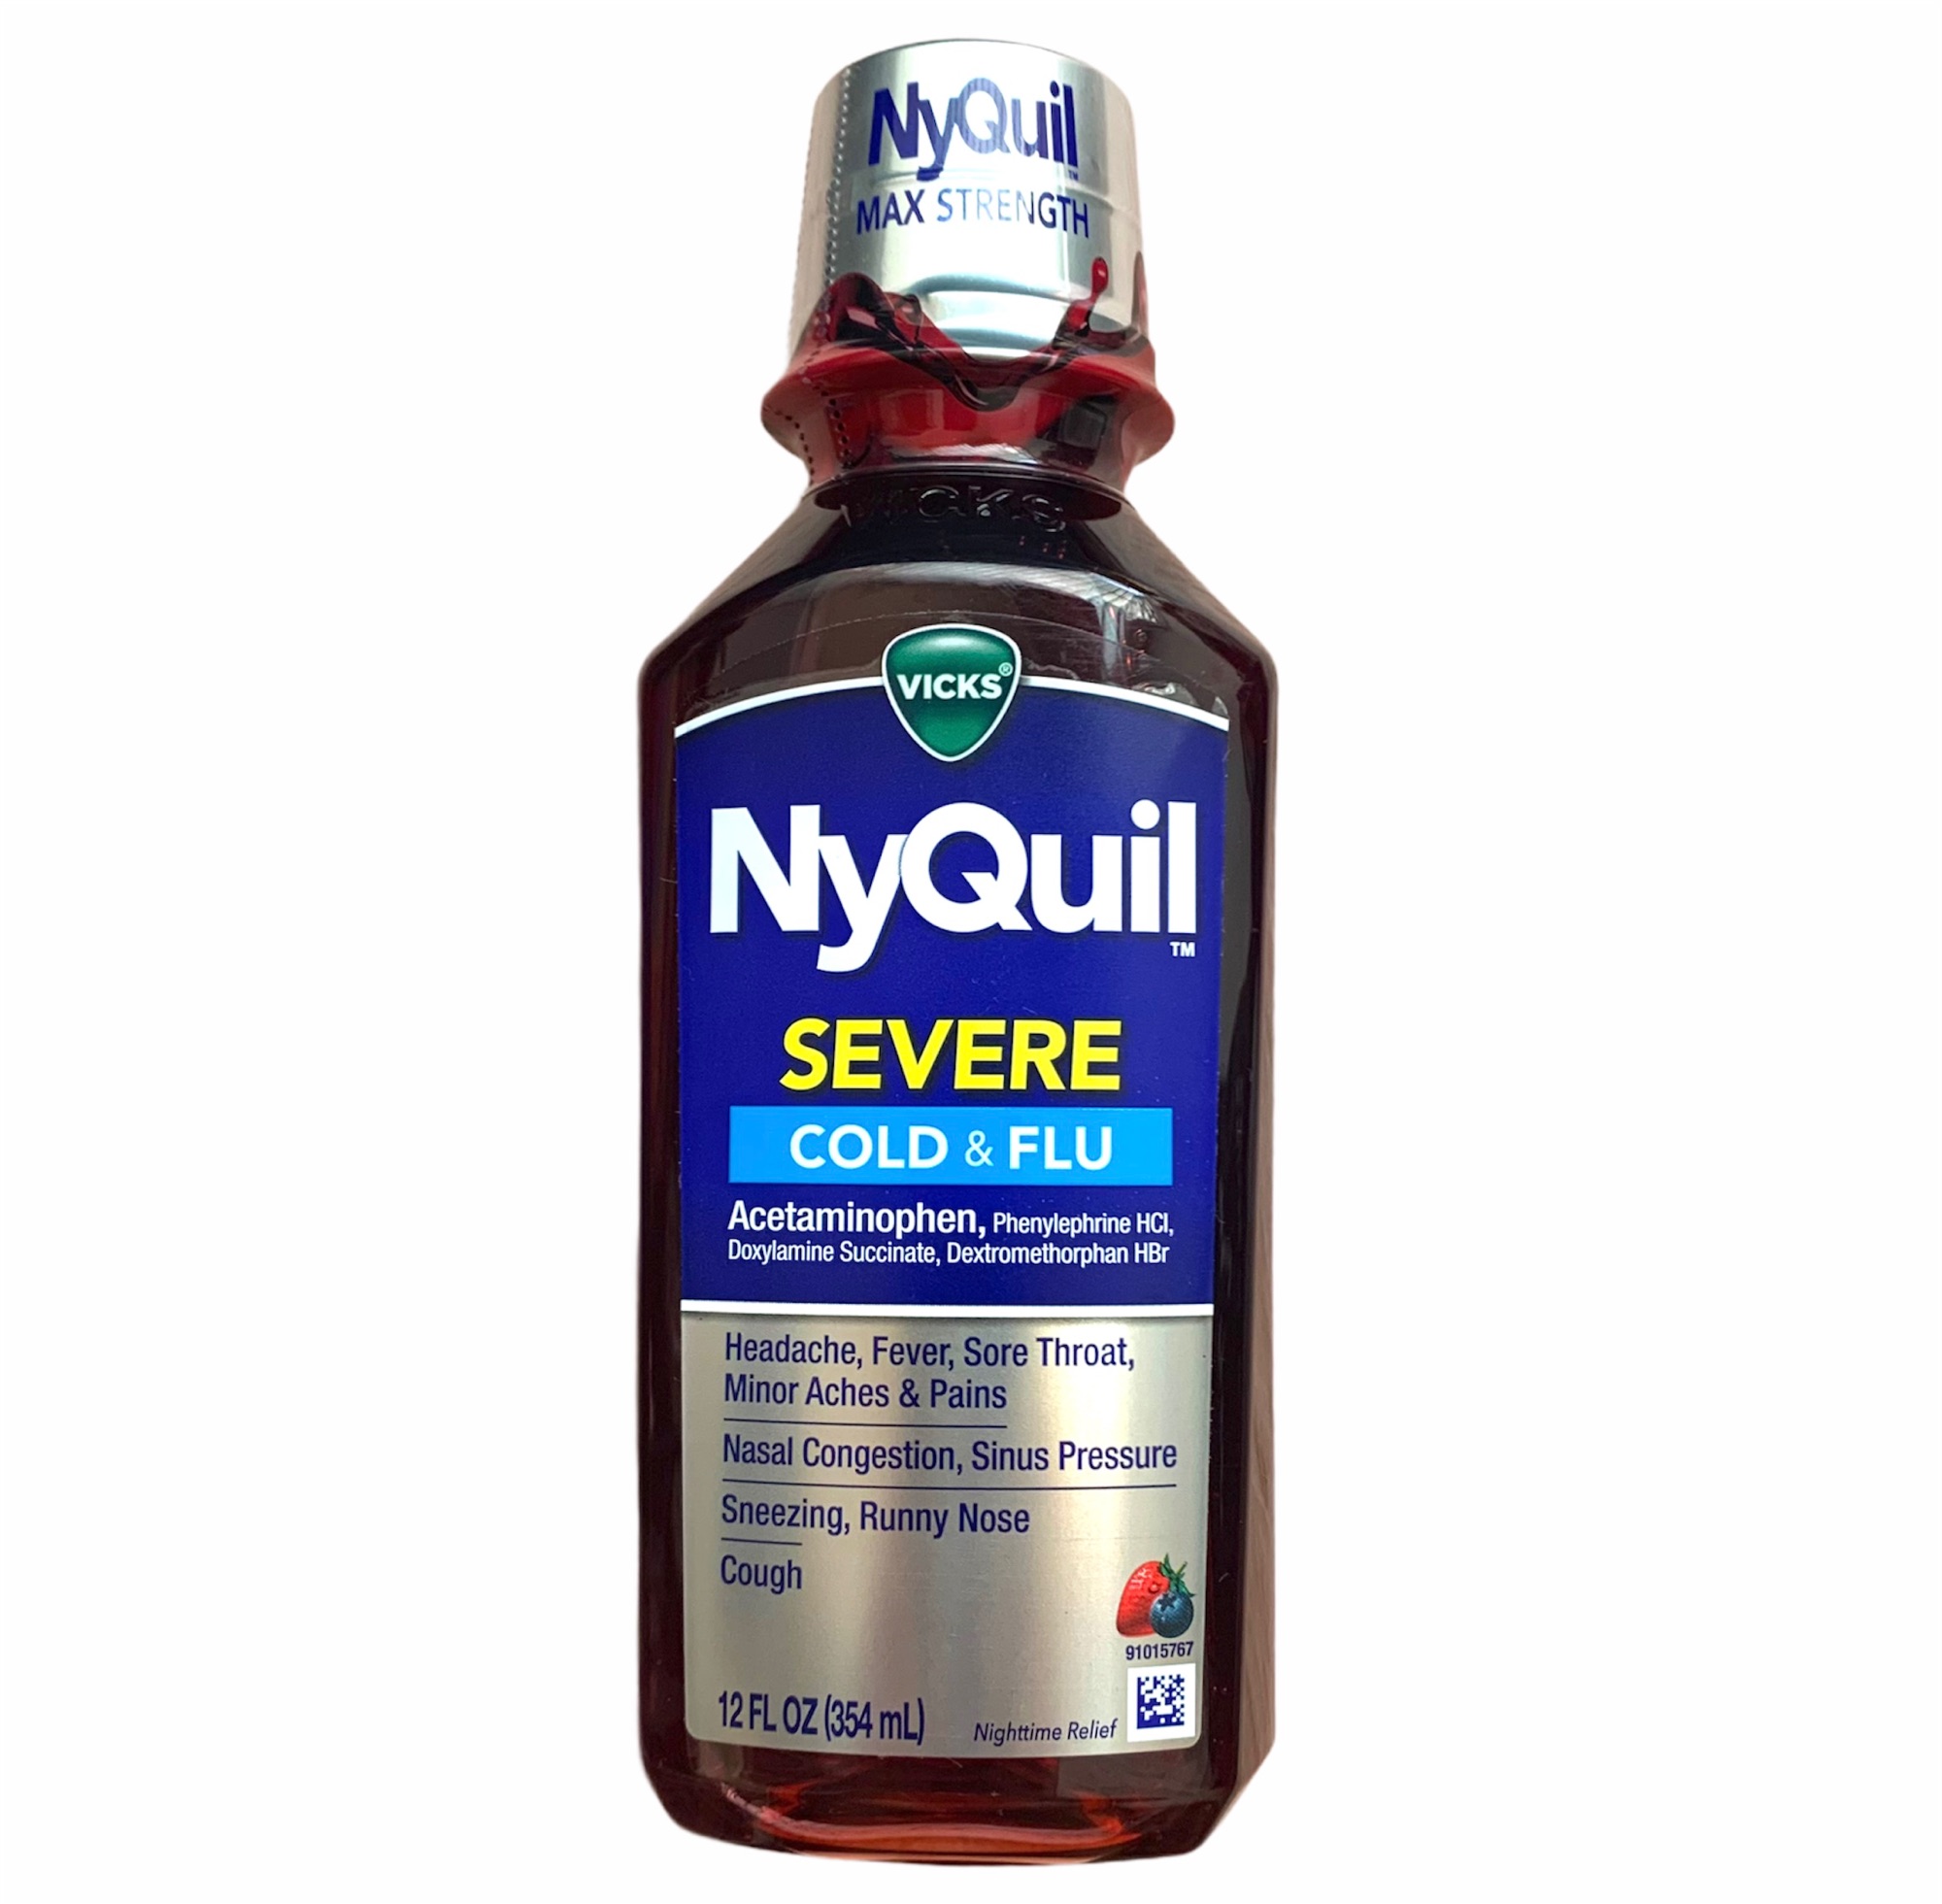 Vicks NyQuil SEVERE Cough Cold and Flu Nighttime Relief Berry Flavor